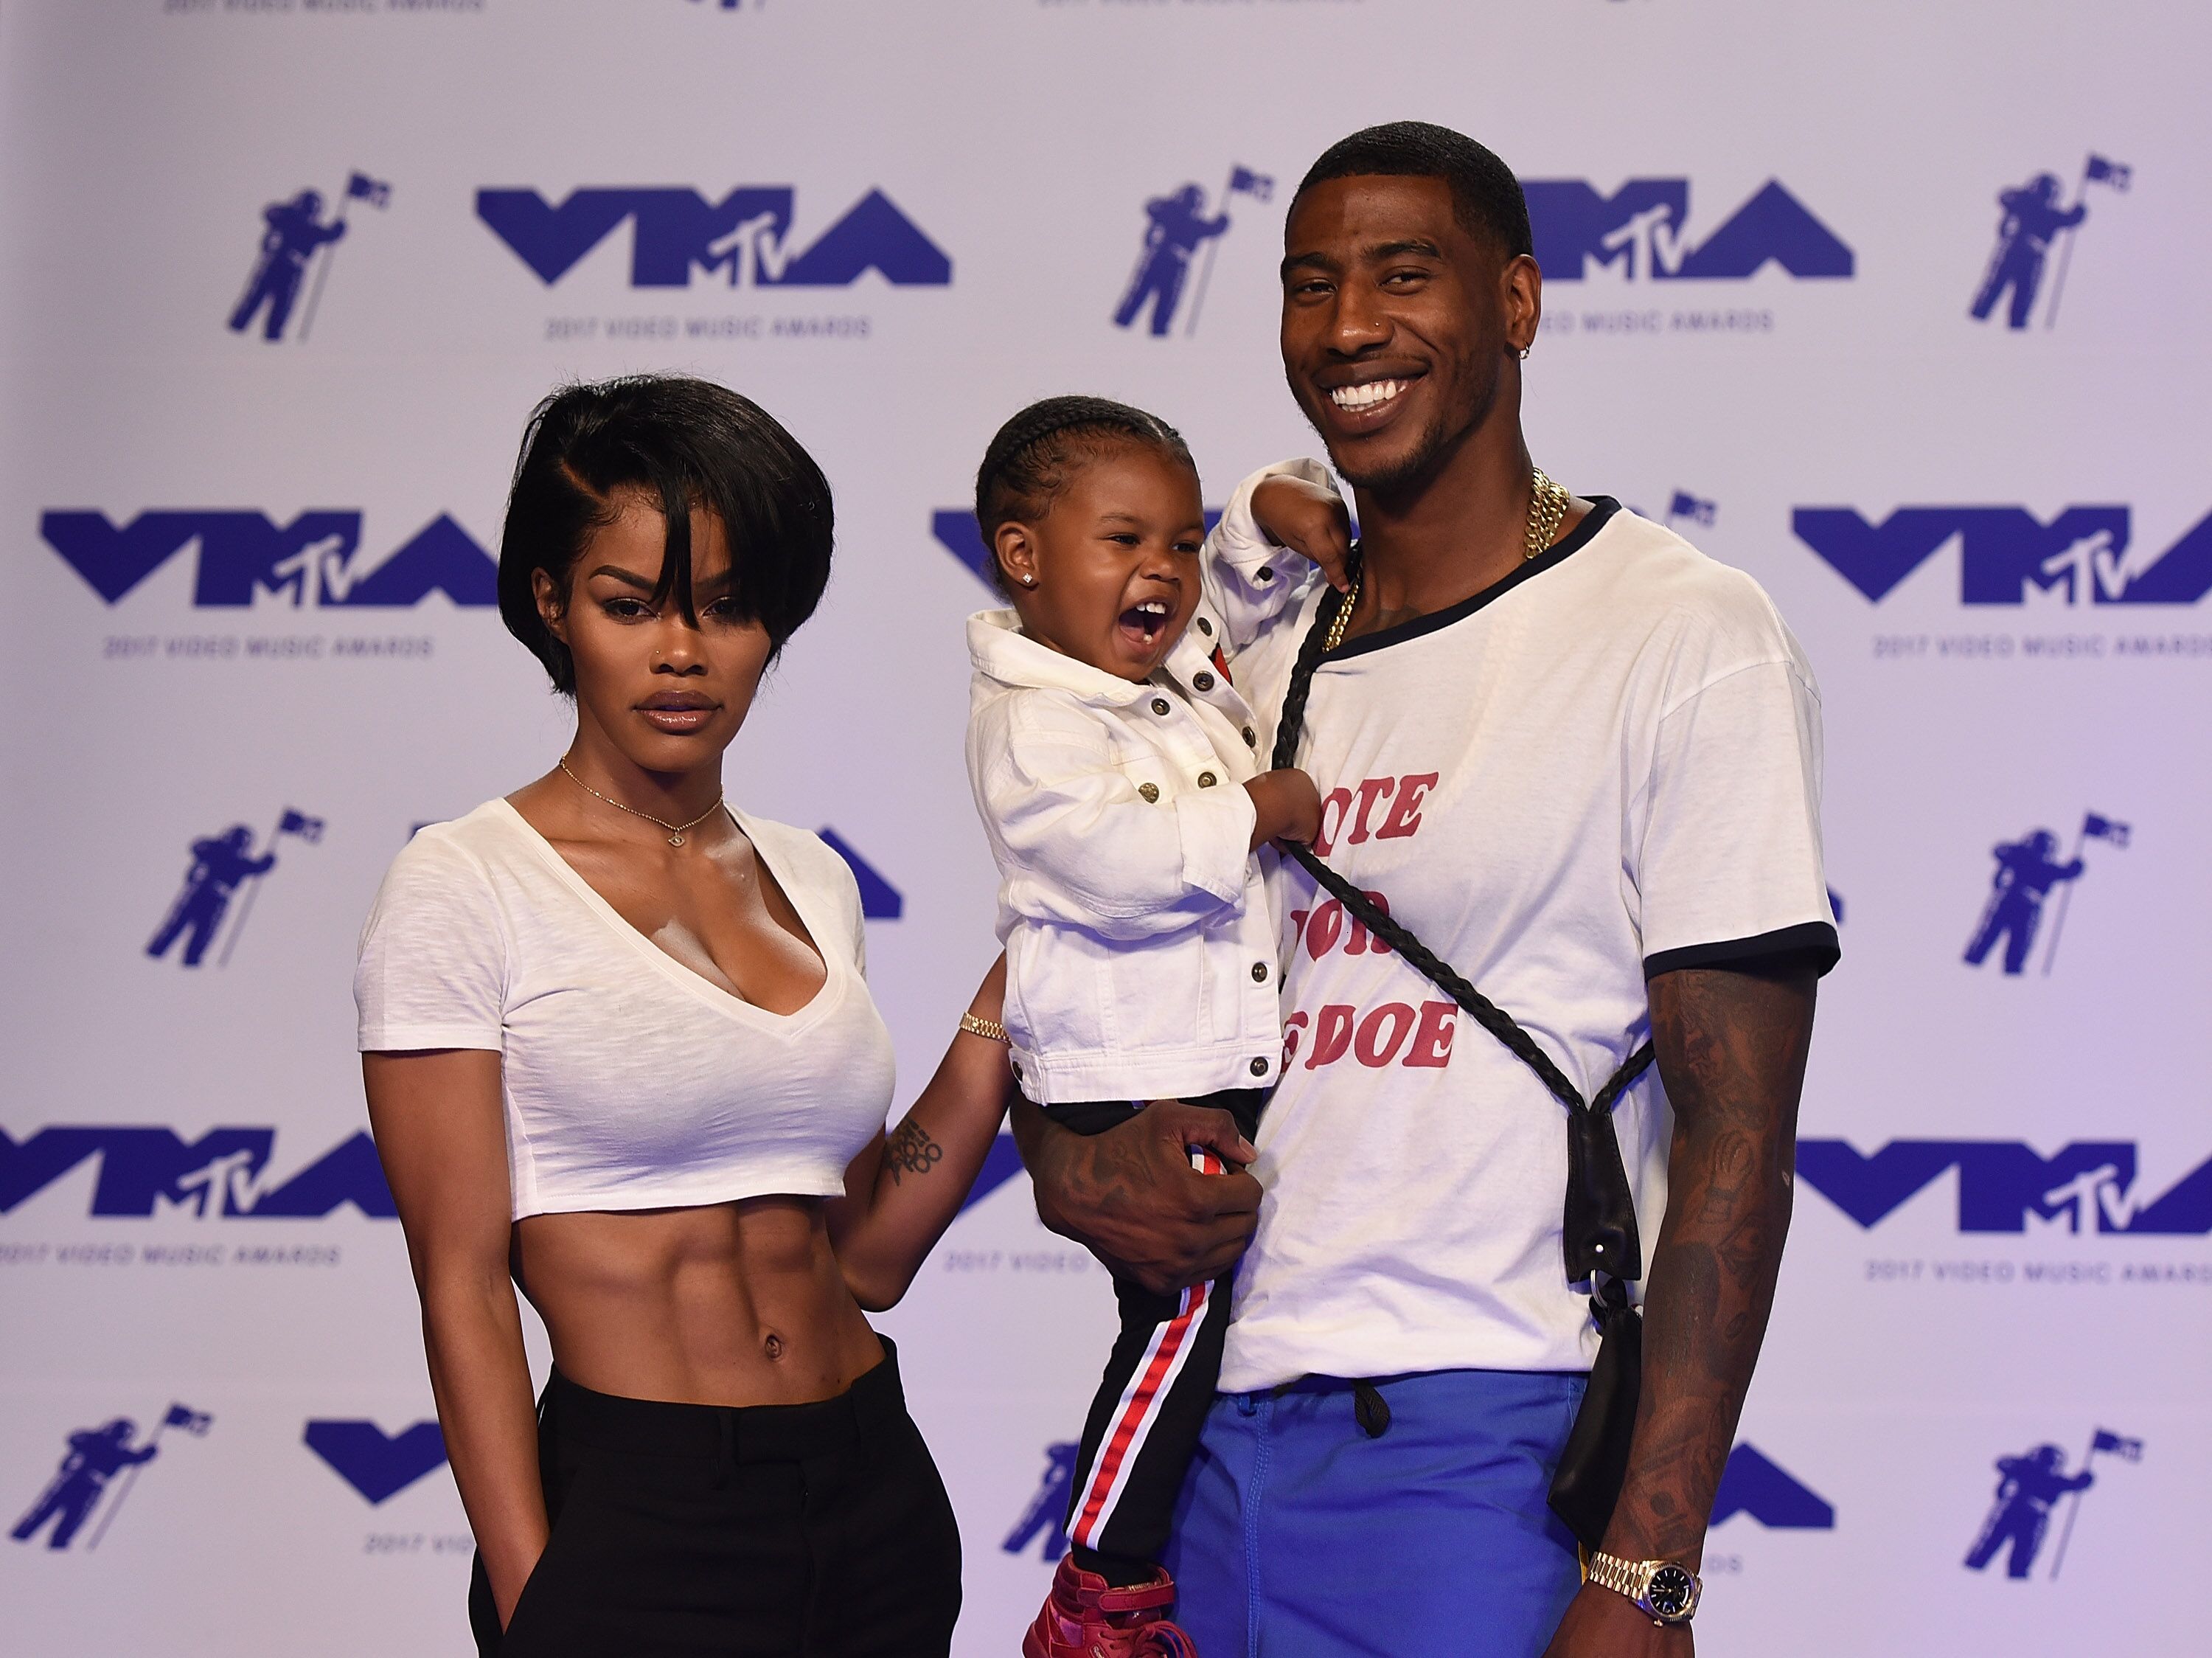 Teyana Taylor (L) Iman Shumpert (R) and their daughter attend the 2017 MTV Video Music Awards at The Forum on August 27, 2017 in Inglewood, California | Photo: Getty Images 